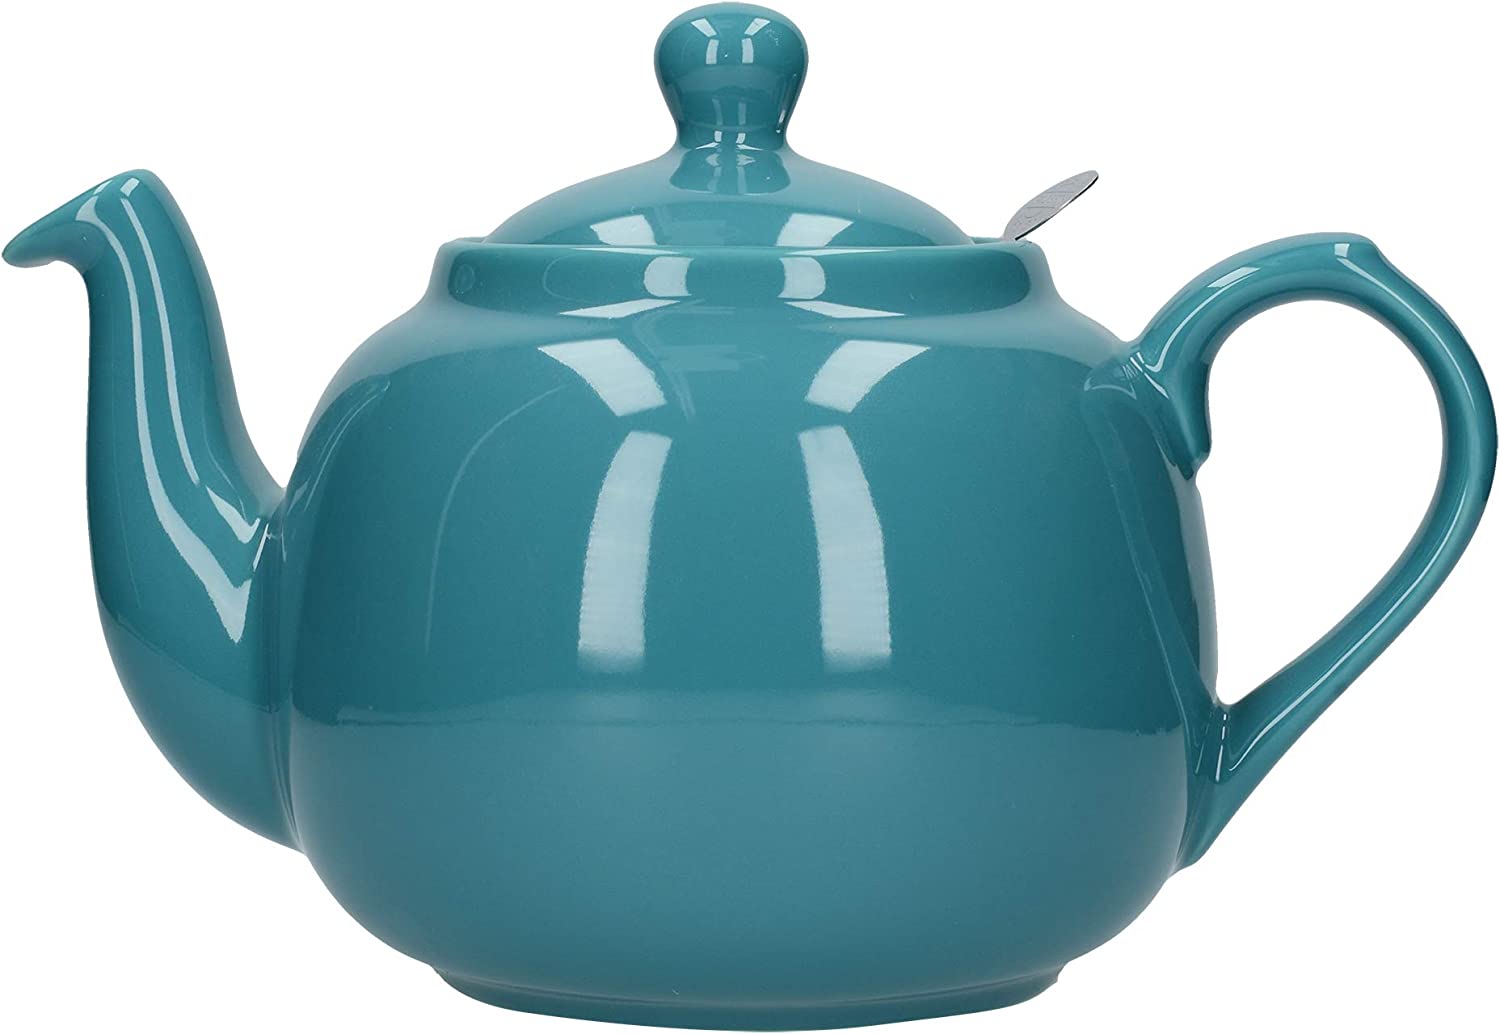 London Pottery Teapot with Filter for 2 Cups Green Ceramic Aqua 6 Cups